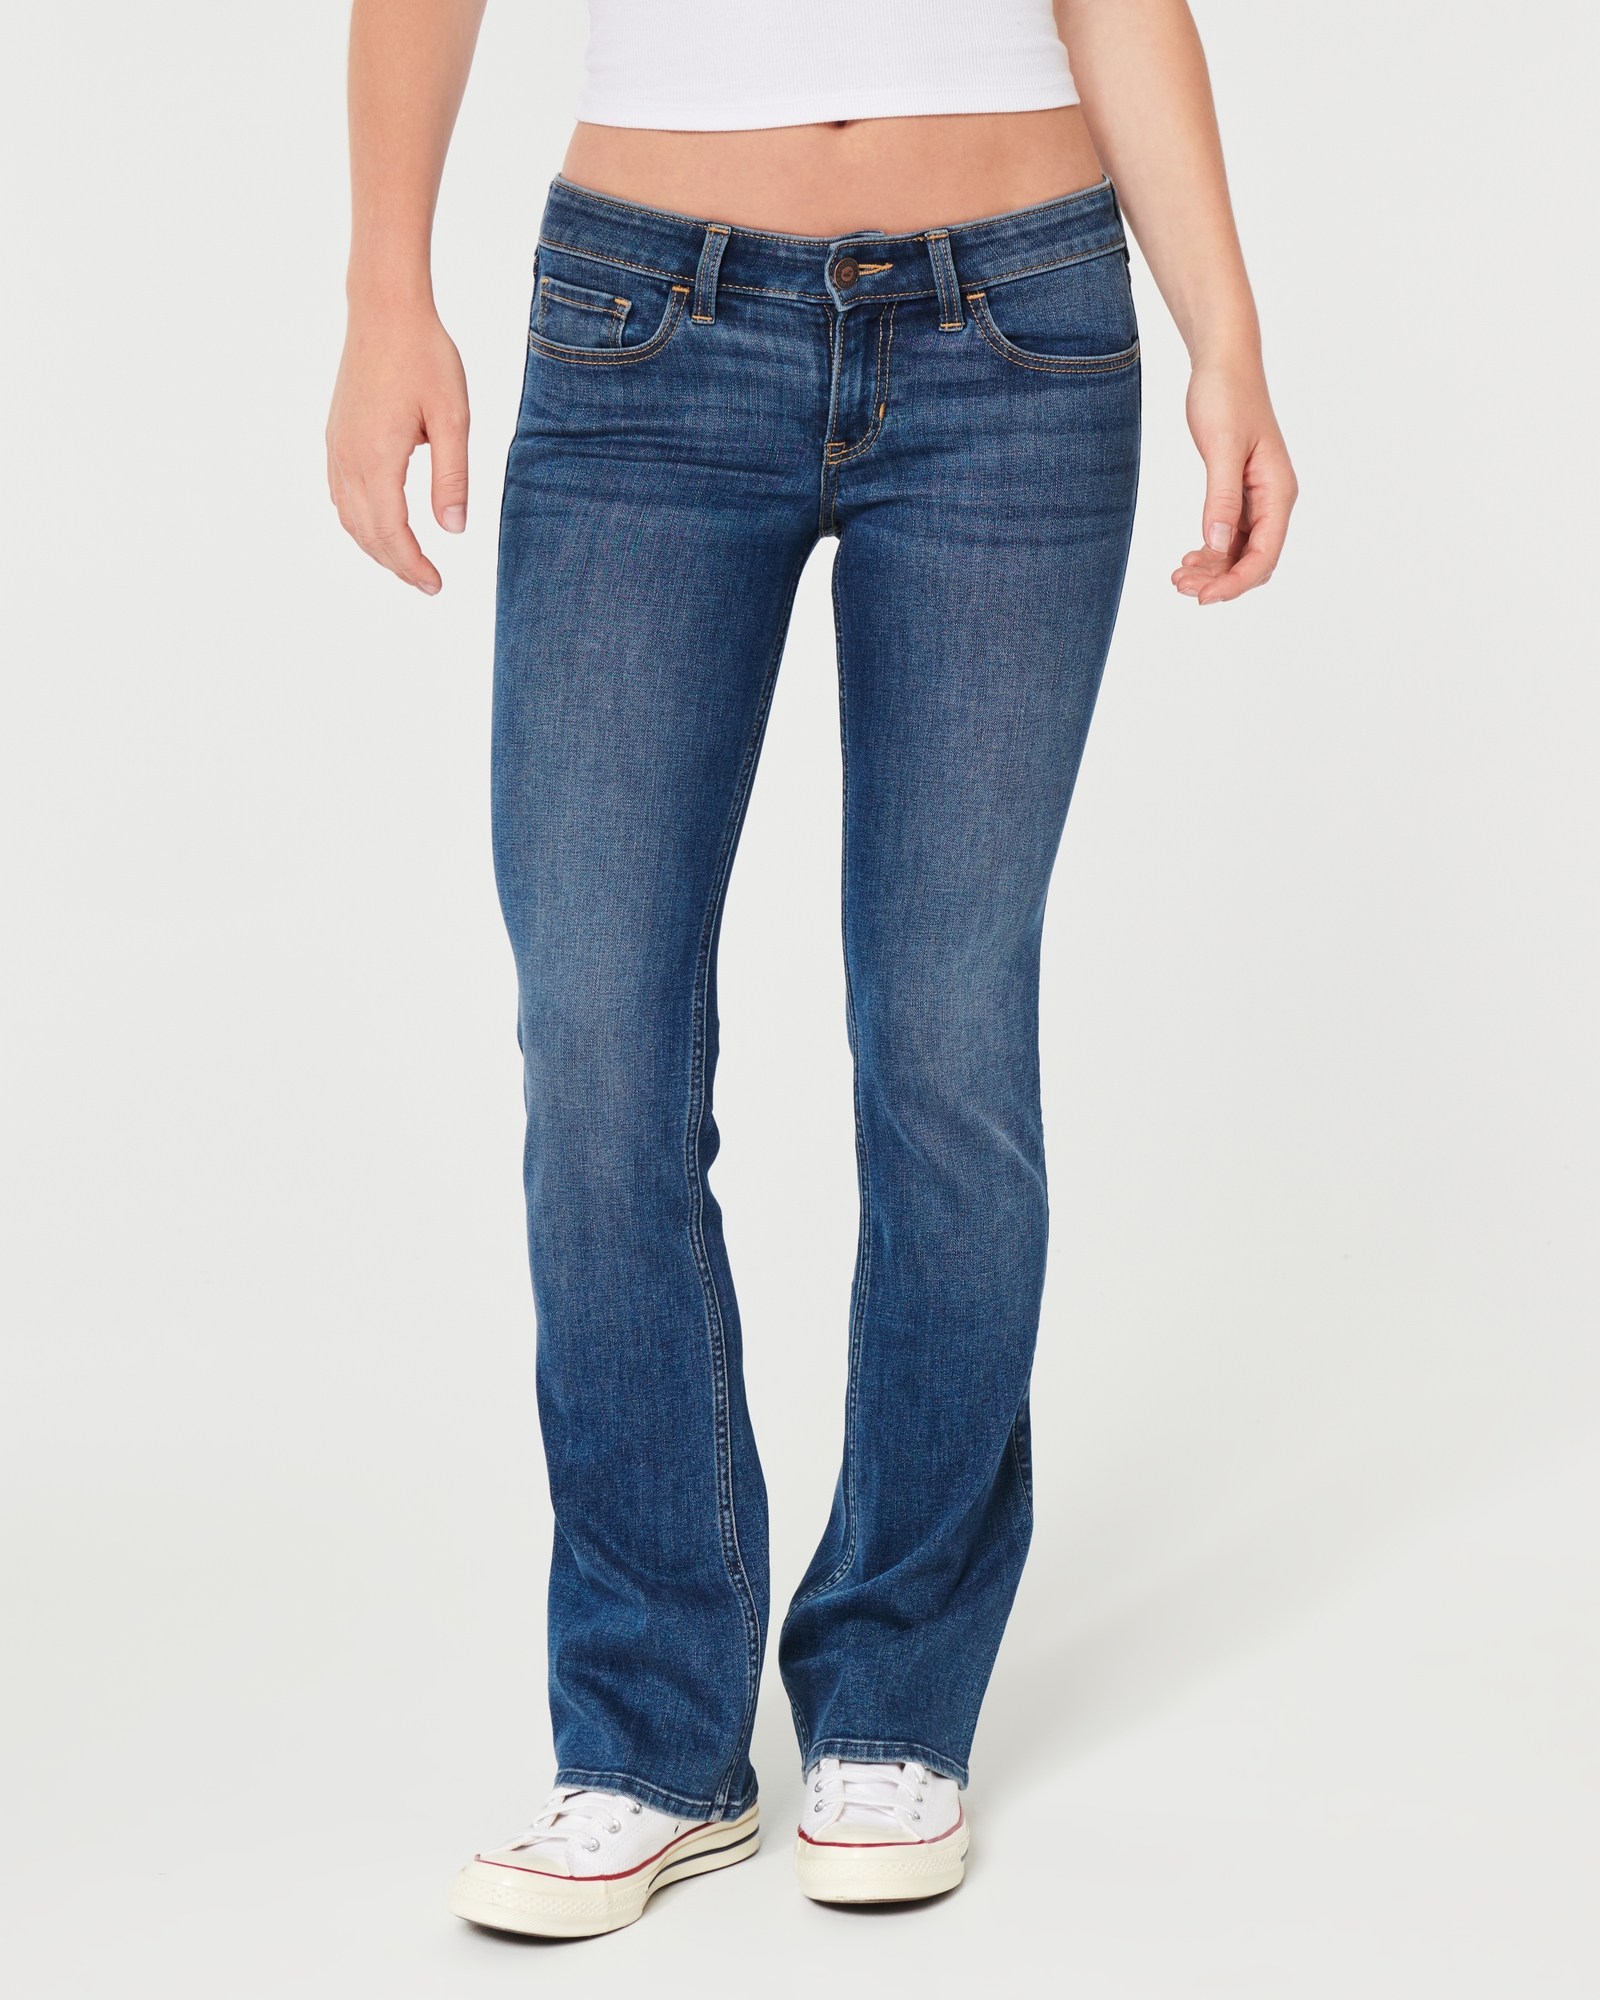 Lucky Brand Lola Bootcut Jeans Y2K Low Rise Medium Wash Size 4